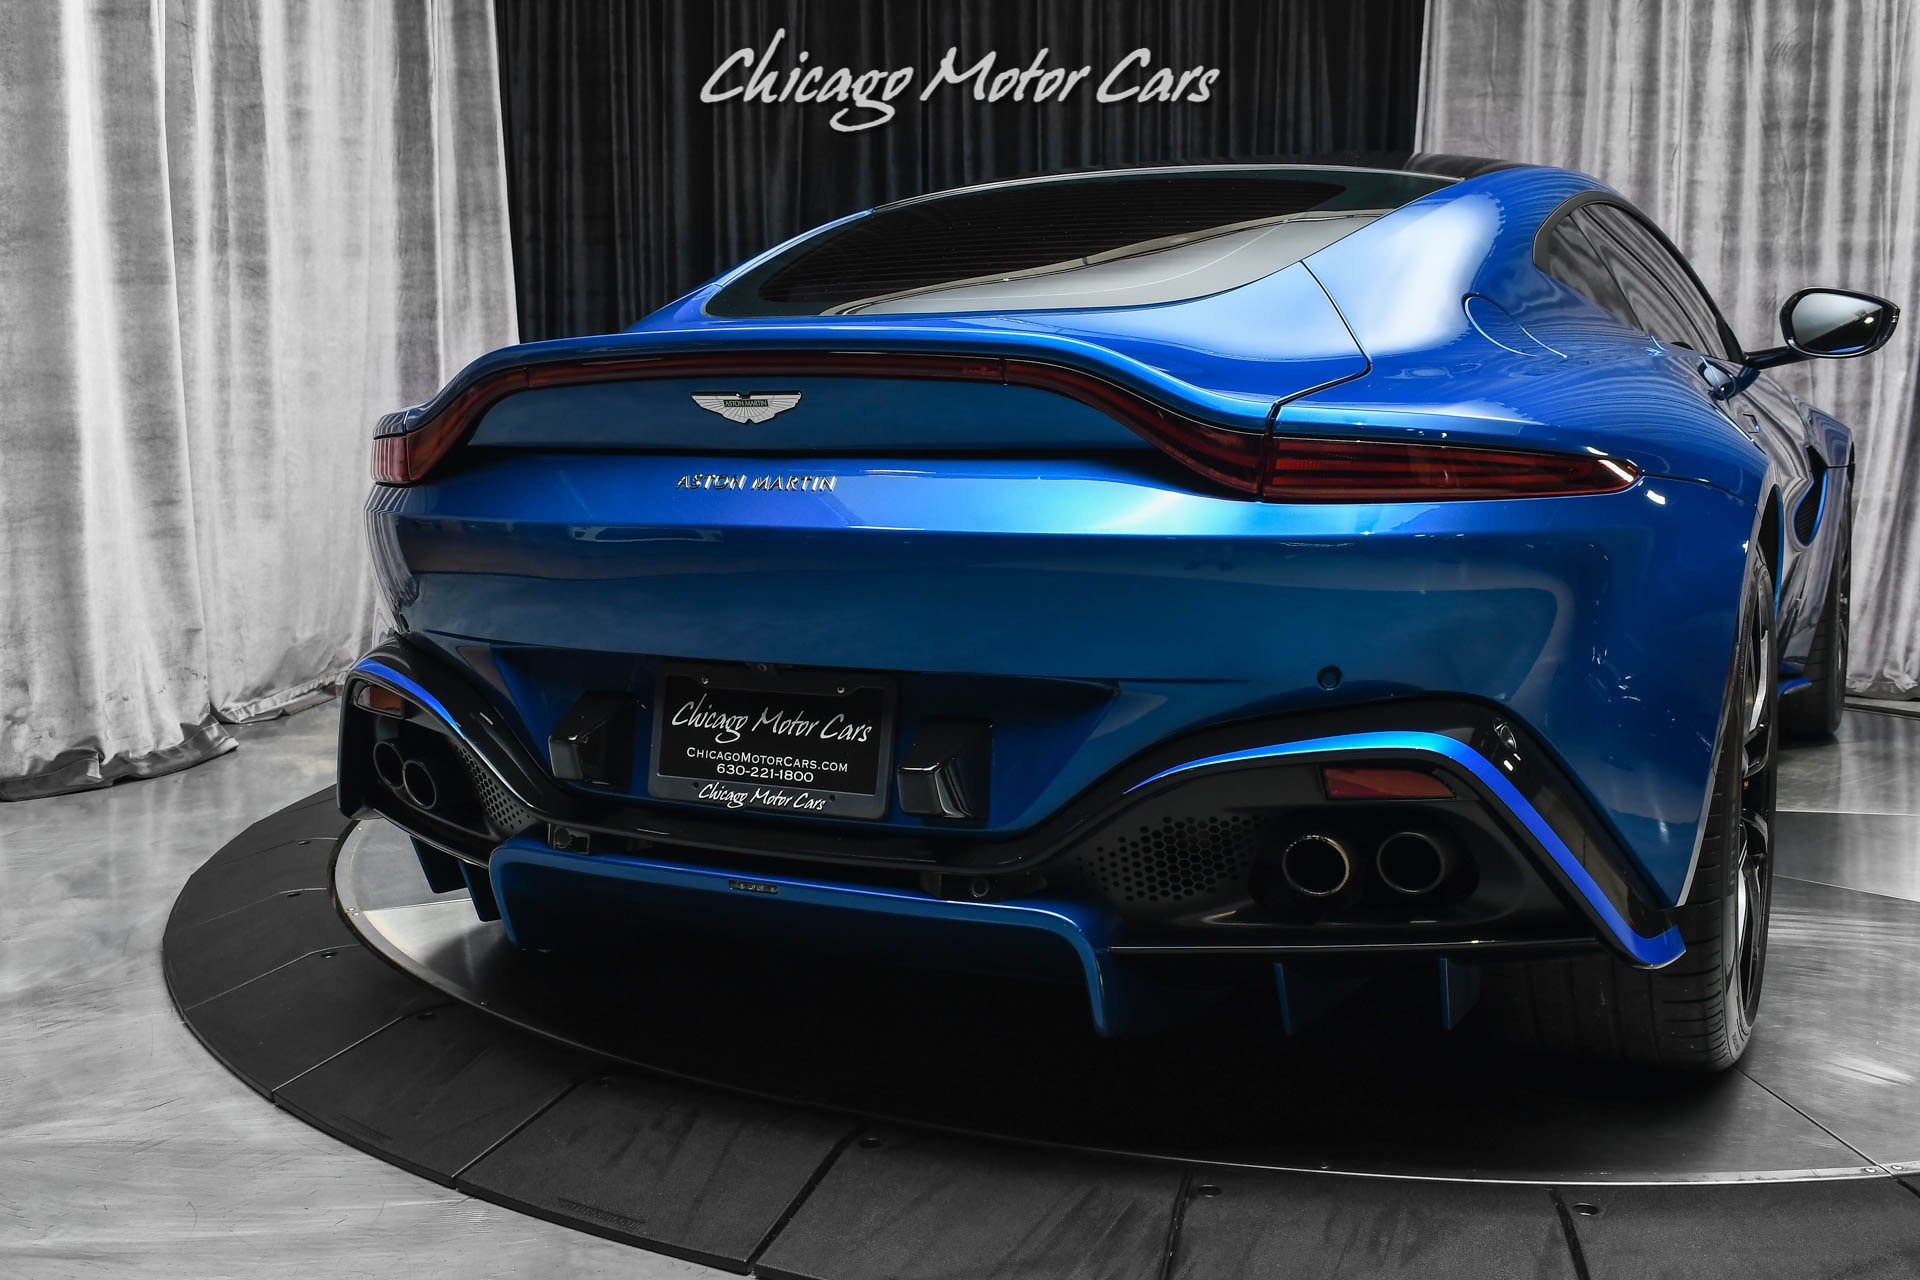 Used-2019-Aston-Martin-Vantage-Coupe-MSRP-190819-Hard-LOADED-Serviced-MING-BLUE